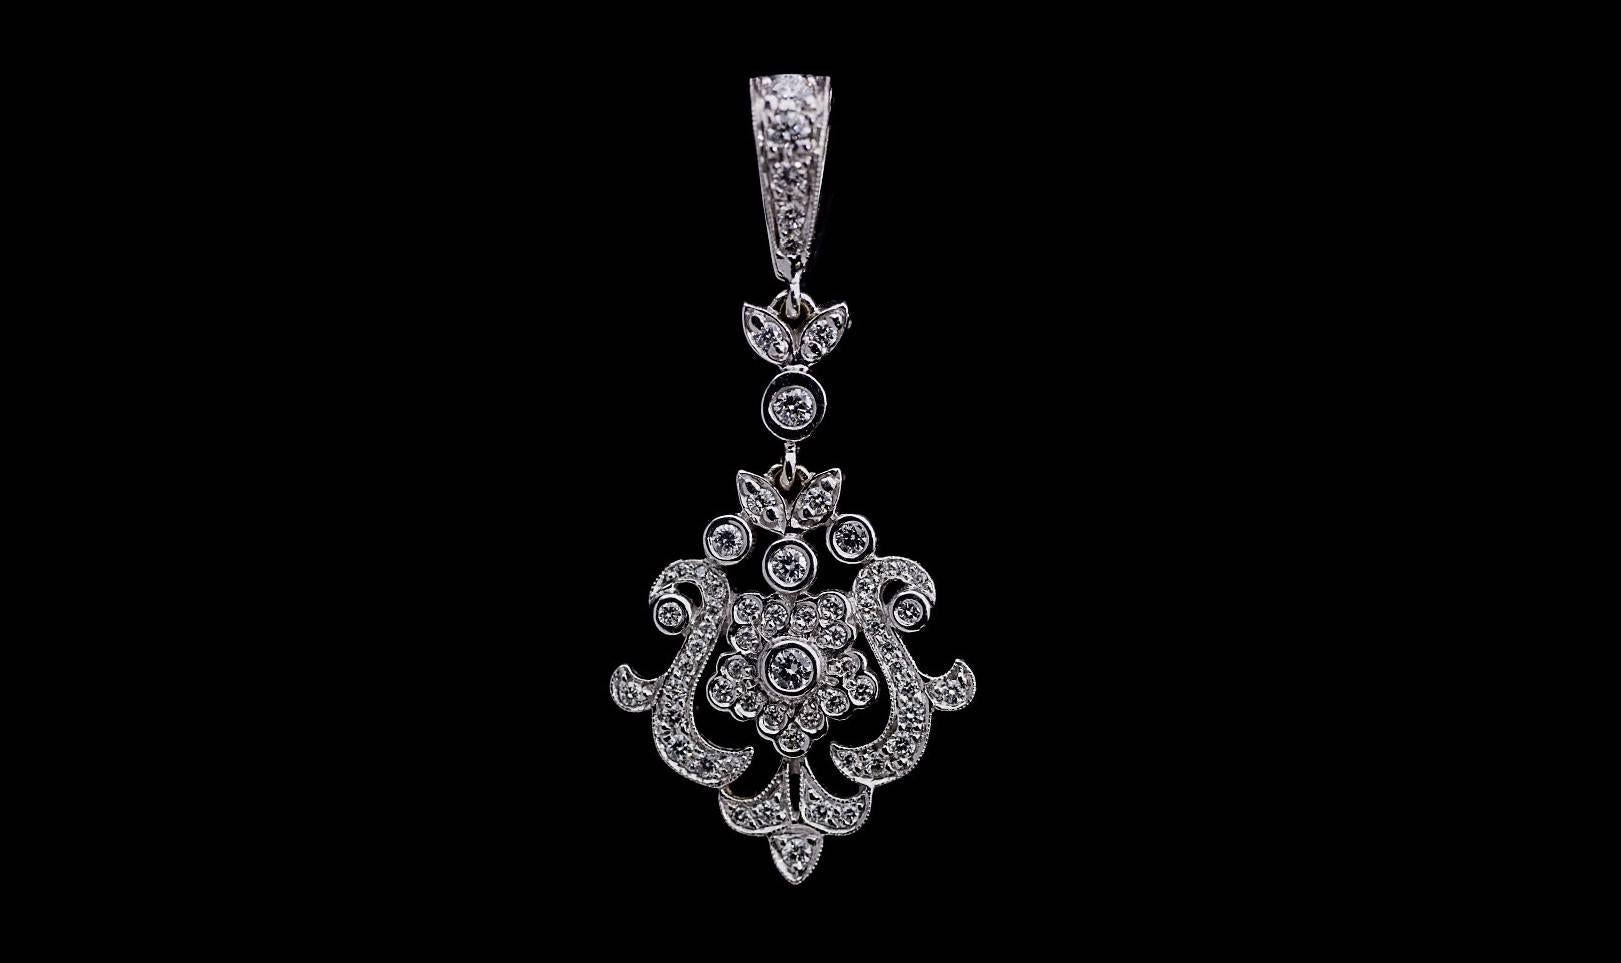 This gorgeous pendant is from the designer Penny Preville, who's been a legend in the jewelry business for over 40 years. Designing classic luxuries from intricate bridal to elegant everyday pieces, Penny captures the essence of what a woman wants